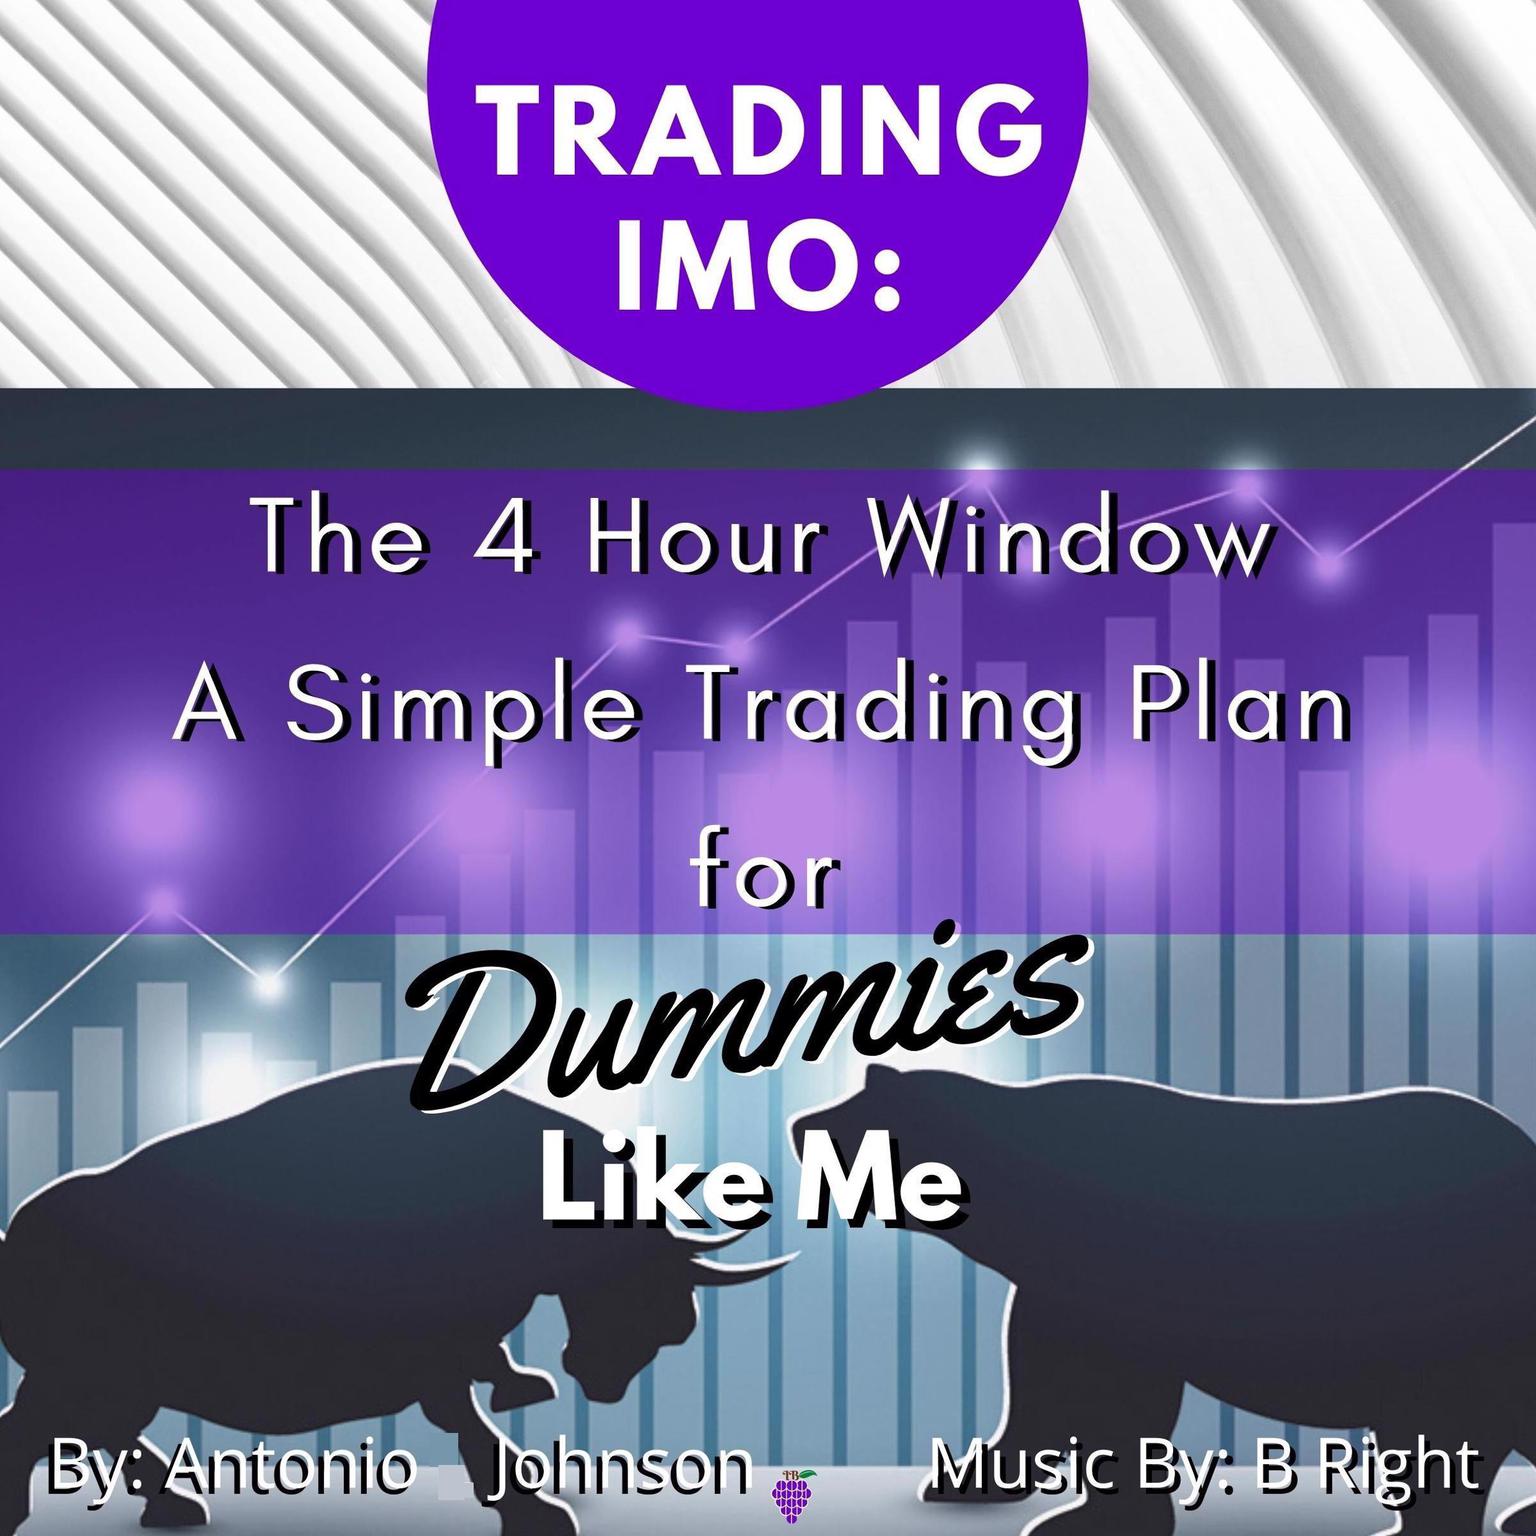 Trading IMO:  The 4 Hour Window.  A Simple Trading Plan For Dummies Like Me (Abridged) Audiobook, by Antonio Johnson